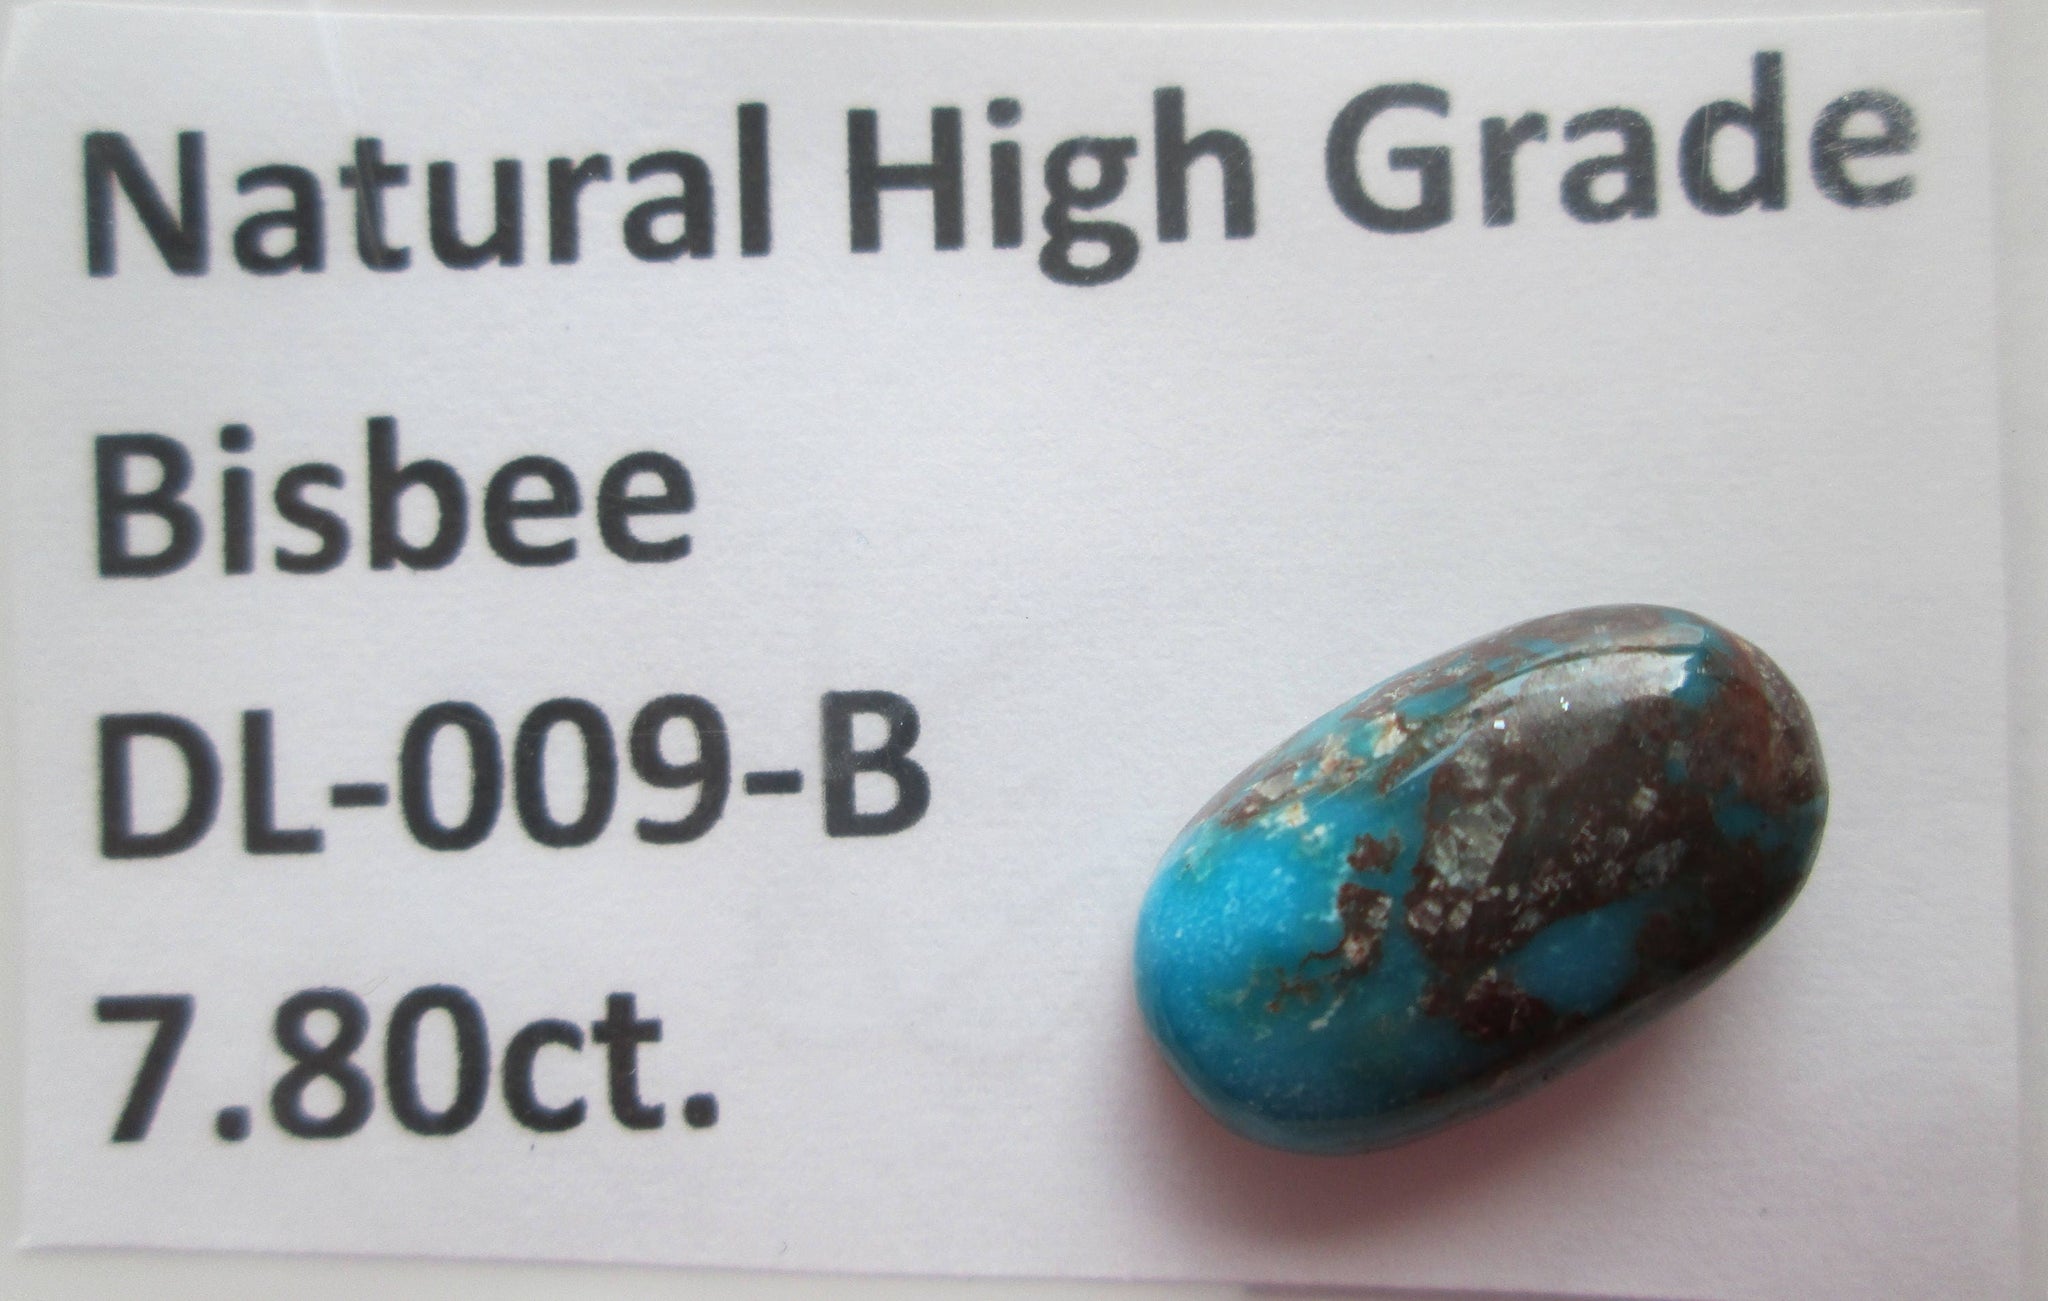 7.80 ct (17x9x5 mm) Natural High Grade Bisbee Turquoise Cabochon Gemst –  Blue Gold Turquoise